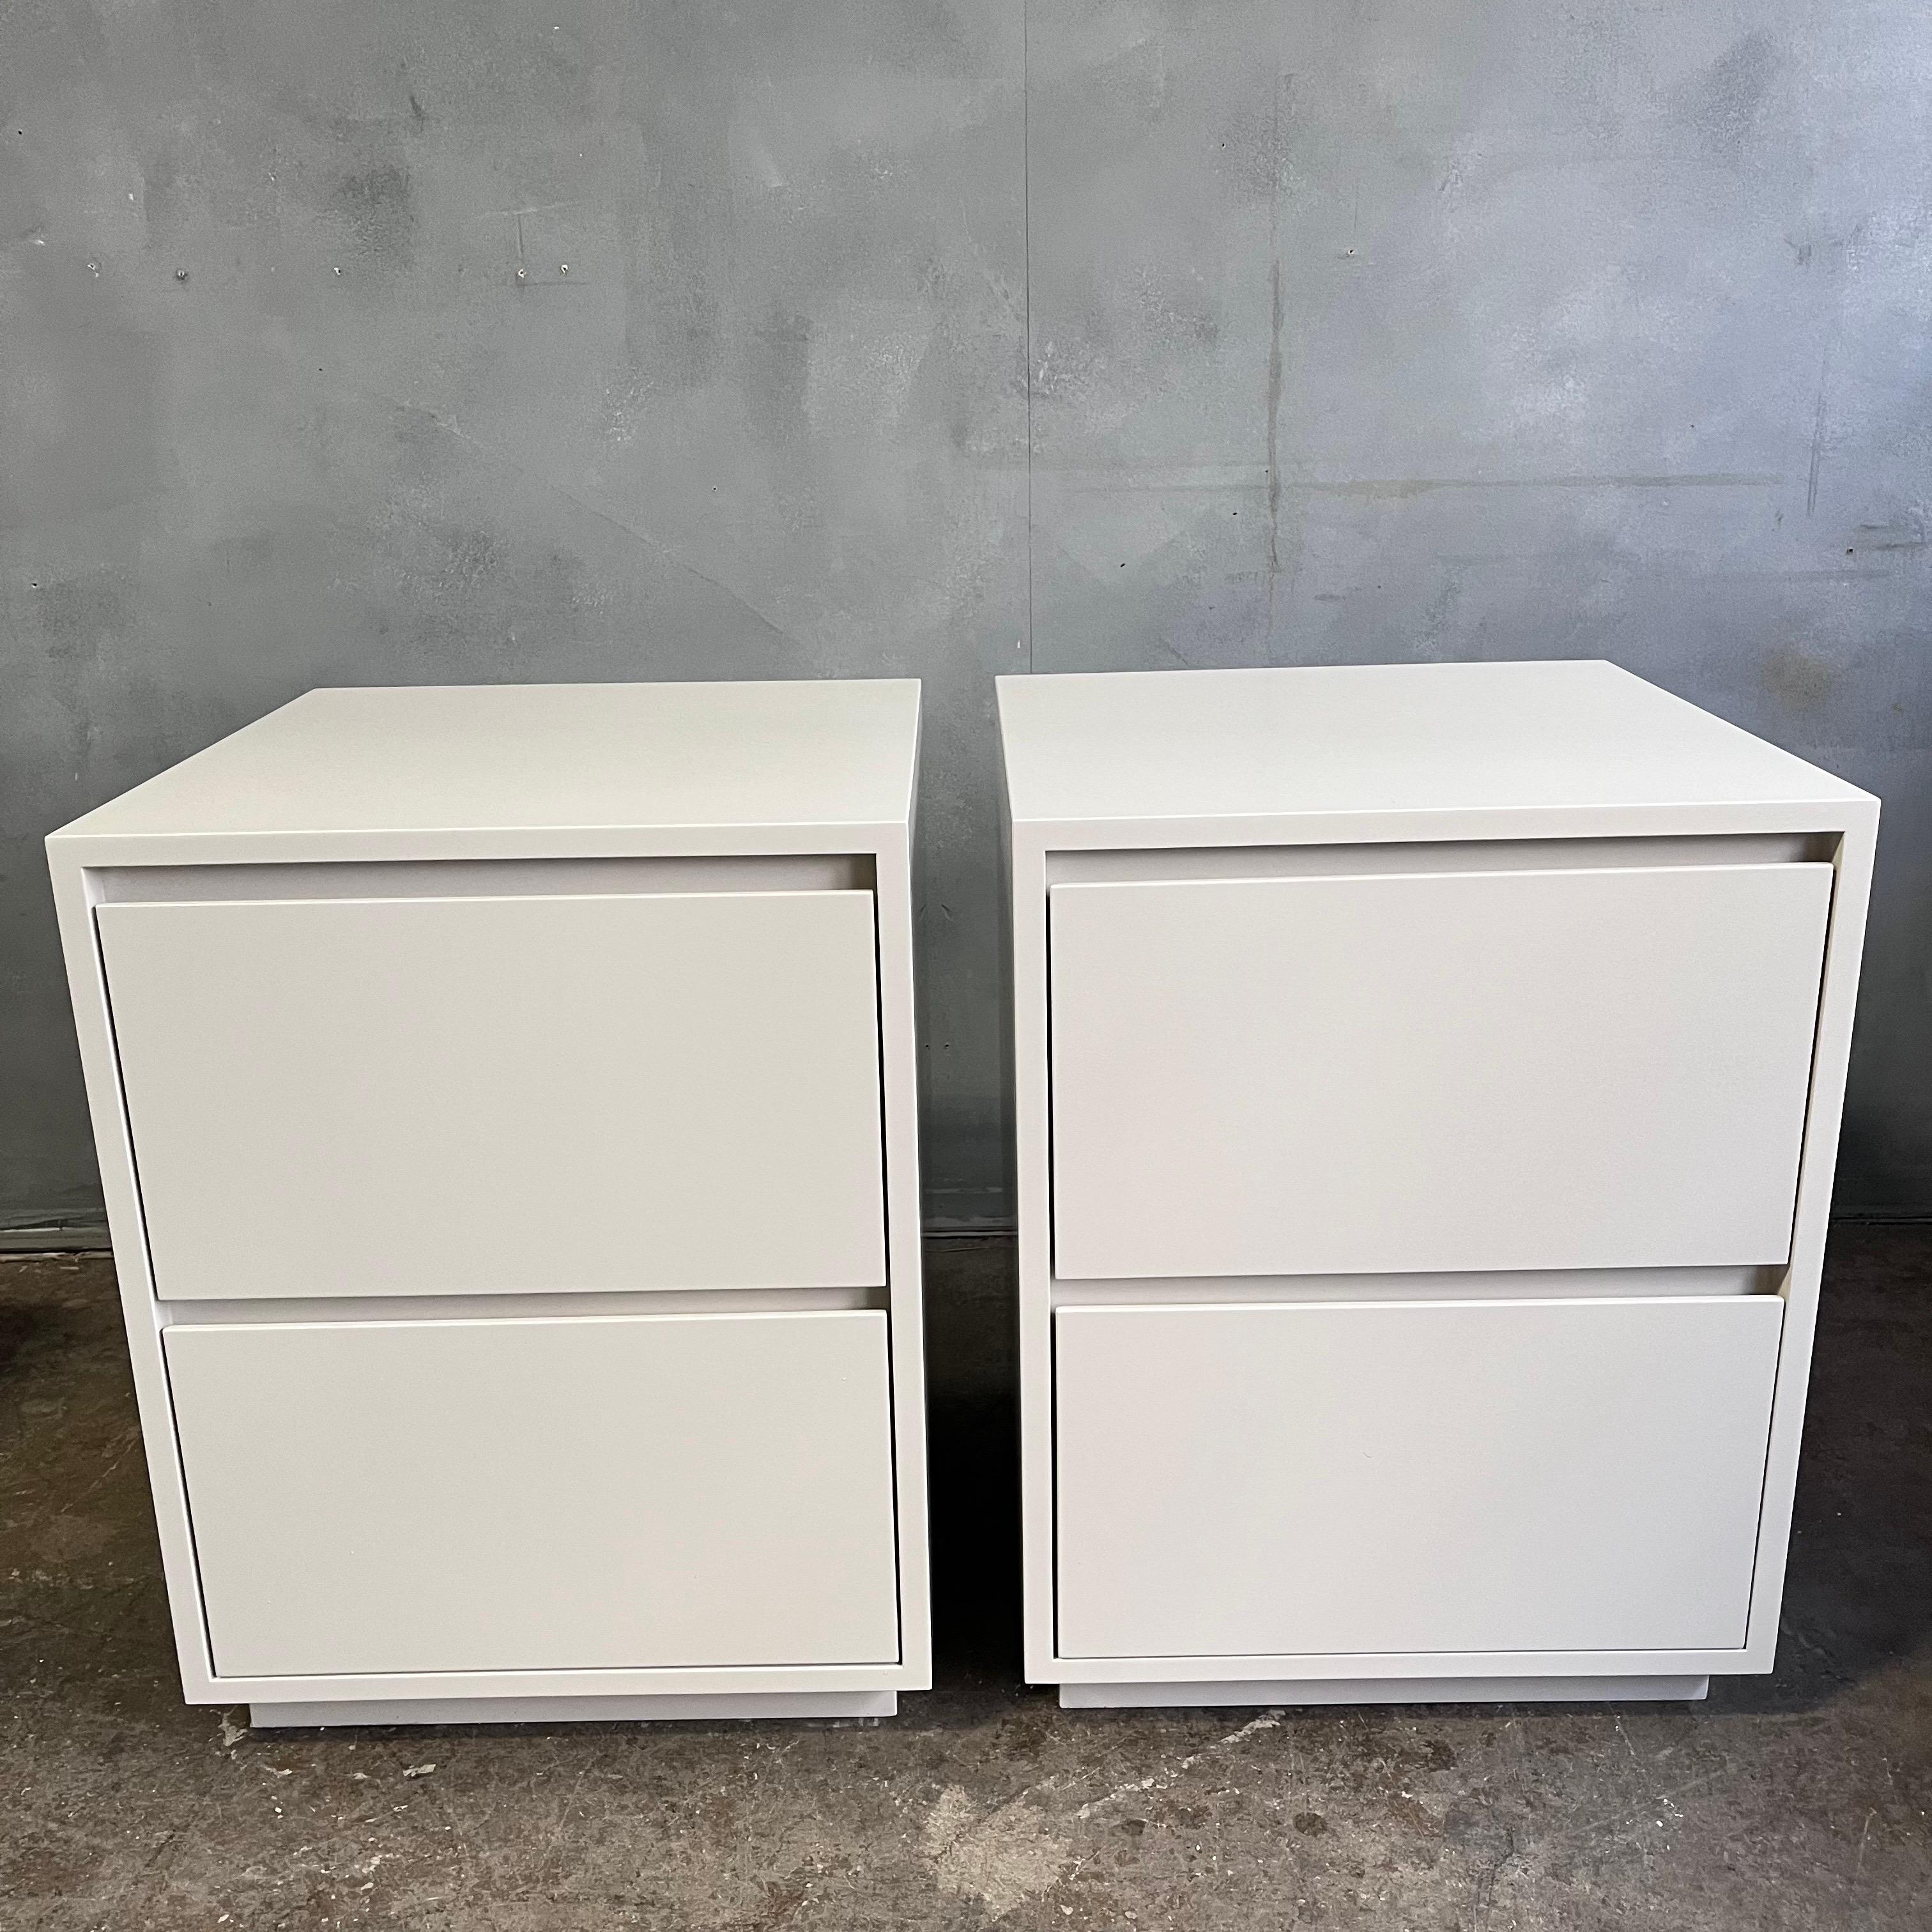 Beautiful and highly crafted nightstands or bedside tables each featuring two drawers in a heavy satin lacquer finish open a floating plinth base. All sides, interior, and back has been finished. Each drawer has soft close mechanisms. Showing almost